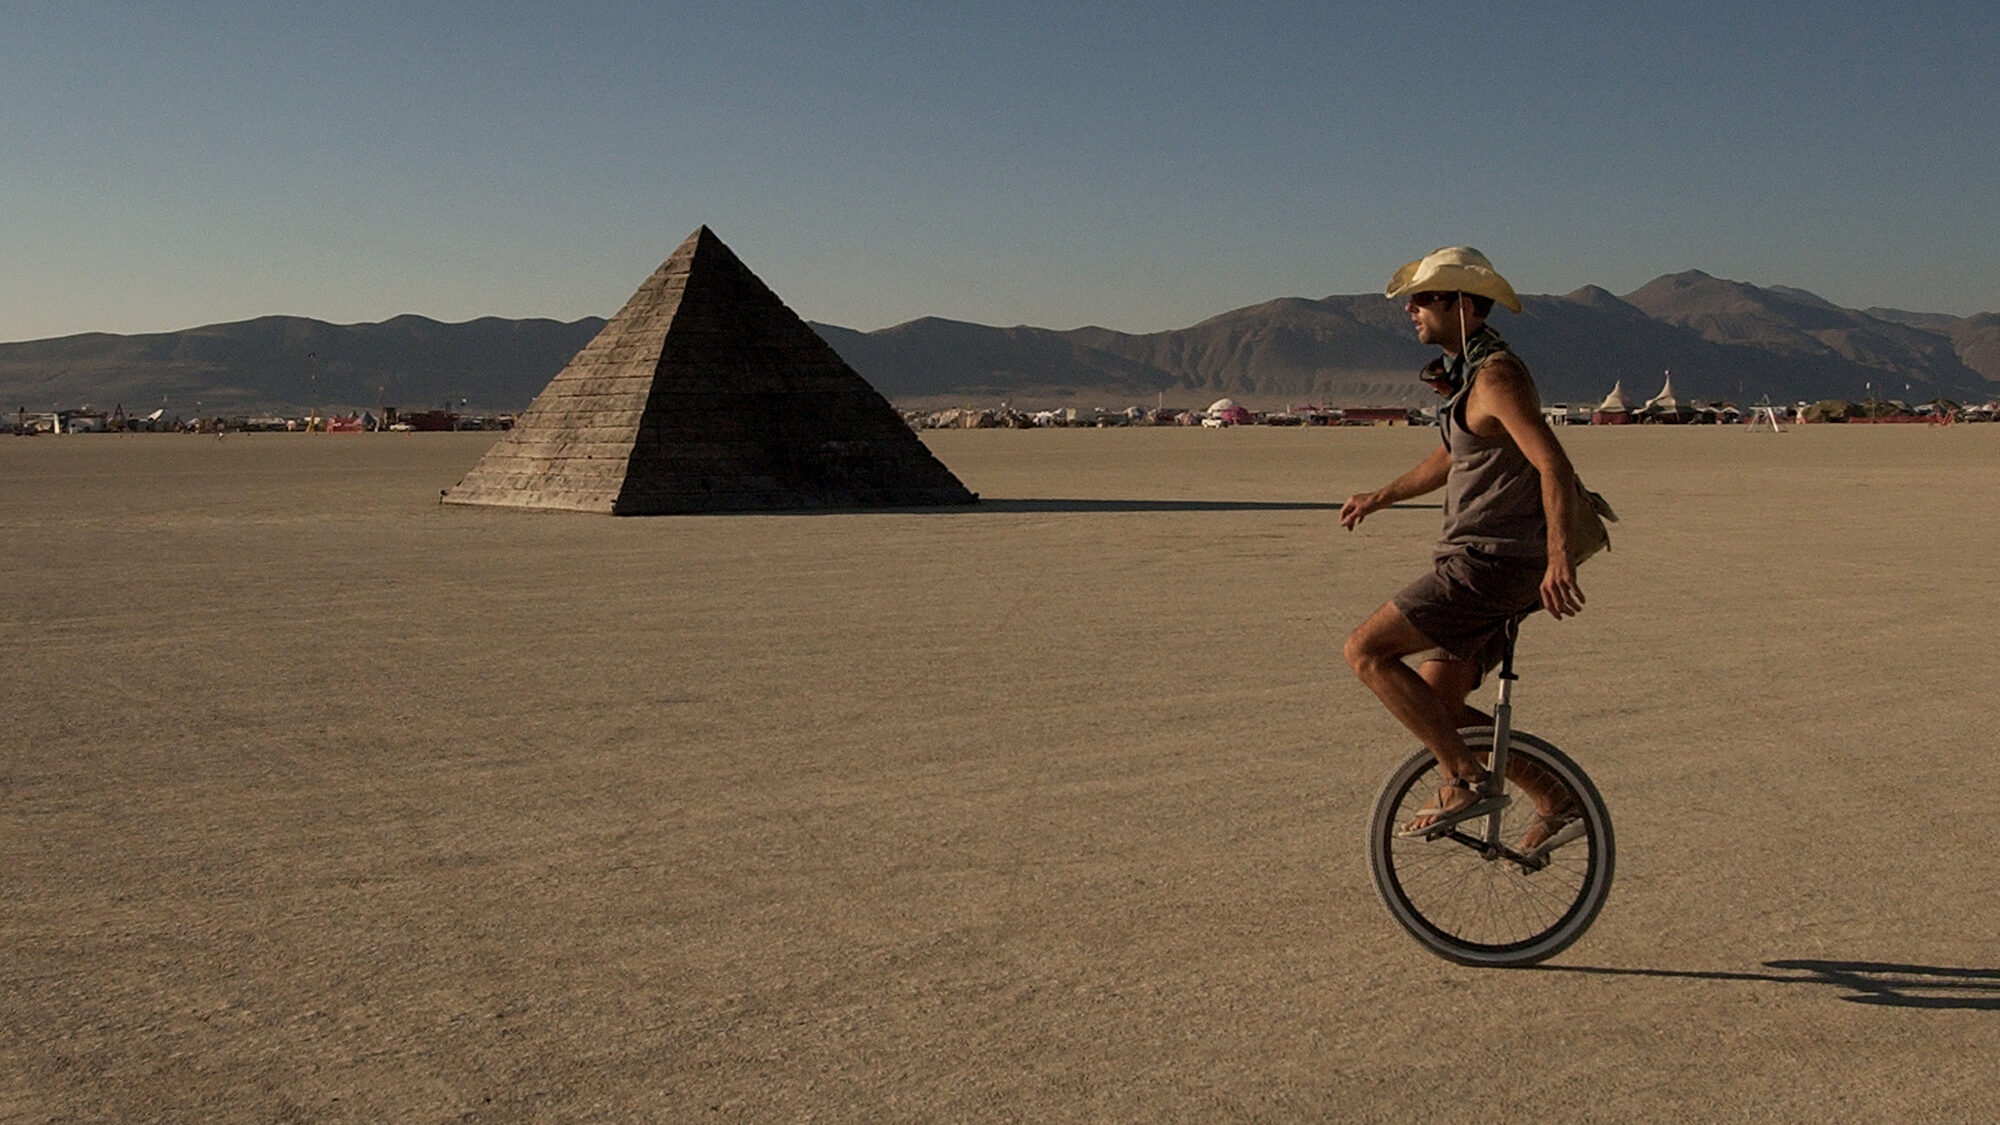 A unicyclist rides past a pyramid on the playa during Burning Man at Black Rock Desert in Nevada, w...